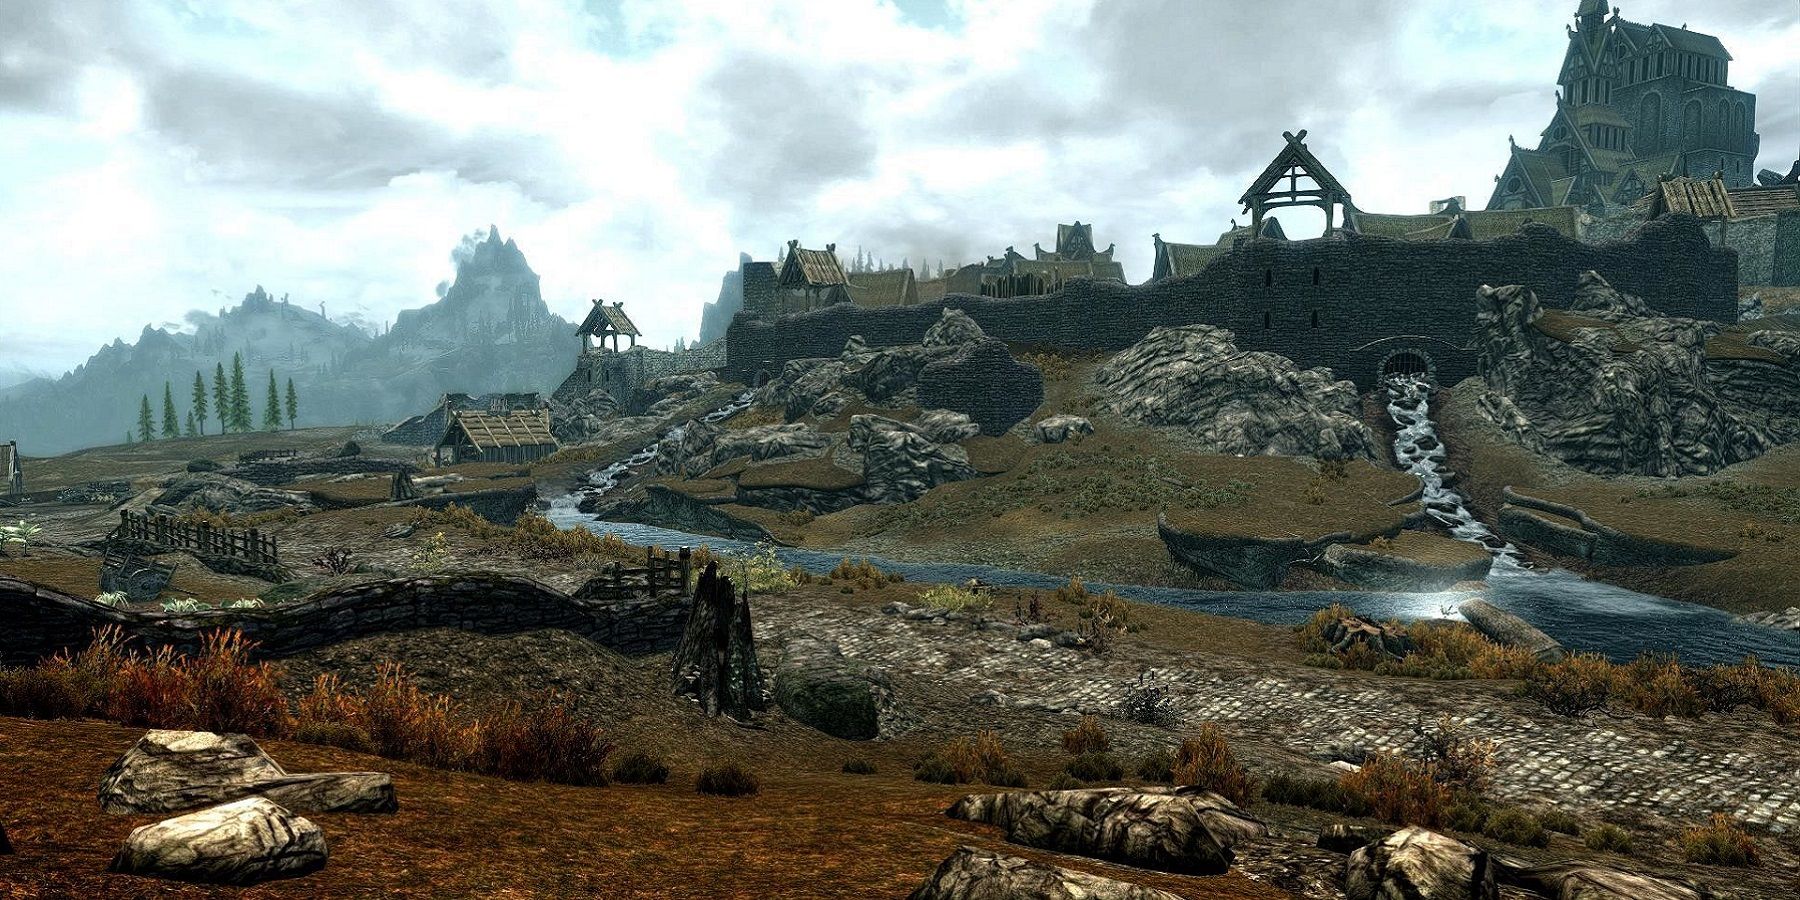 Image from Skyrim showing the city of Whiterun in the background.